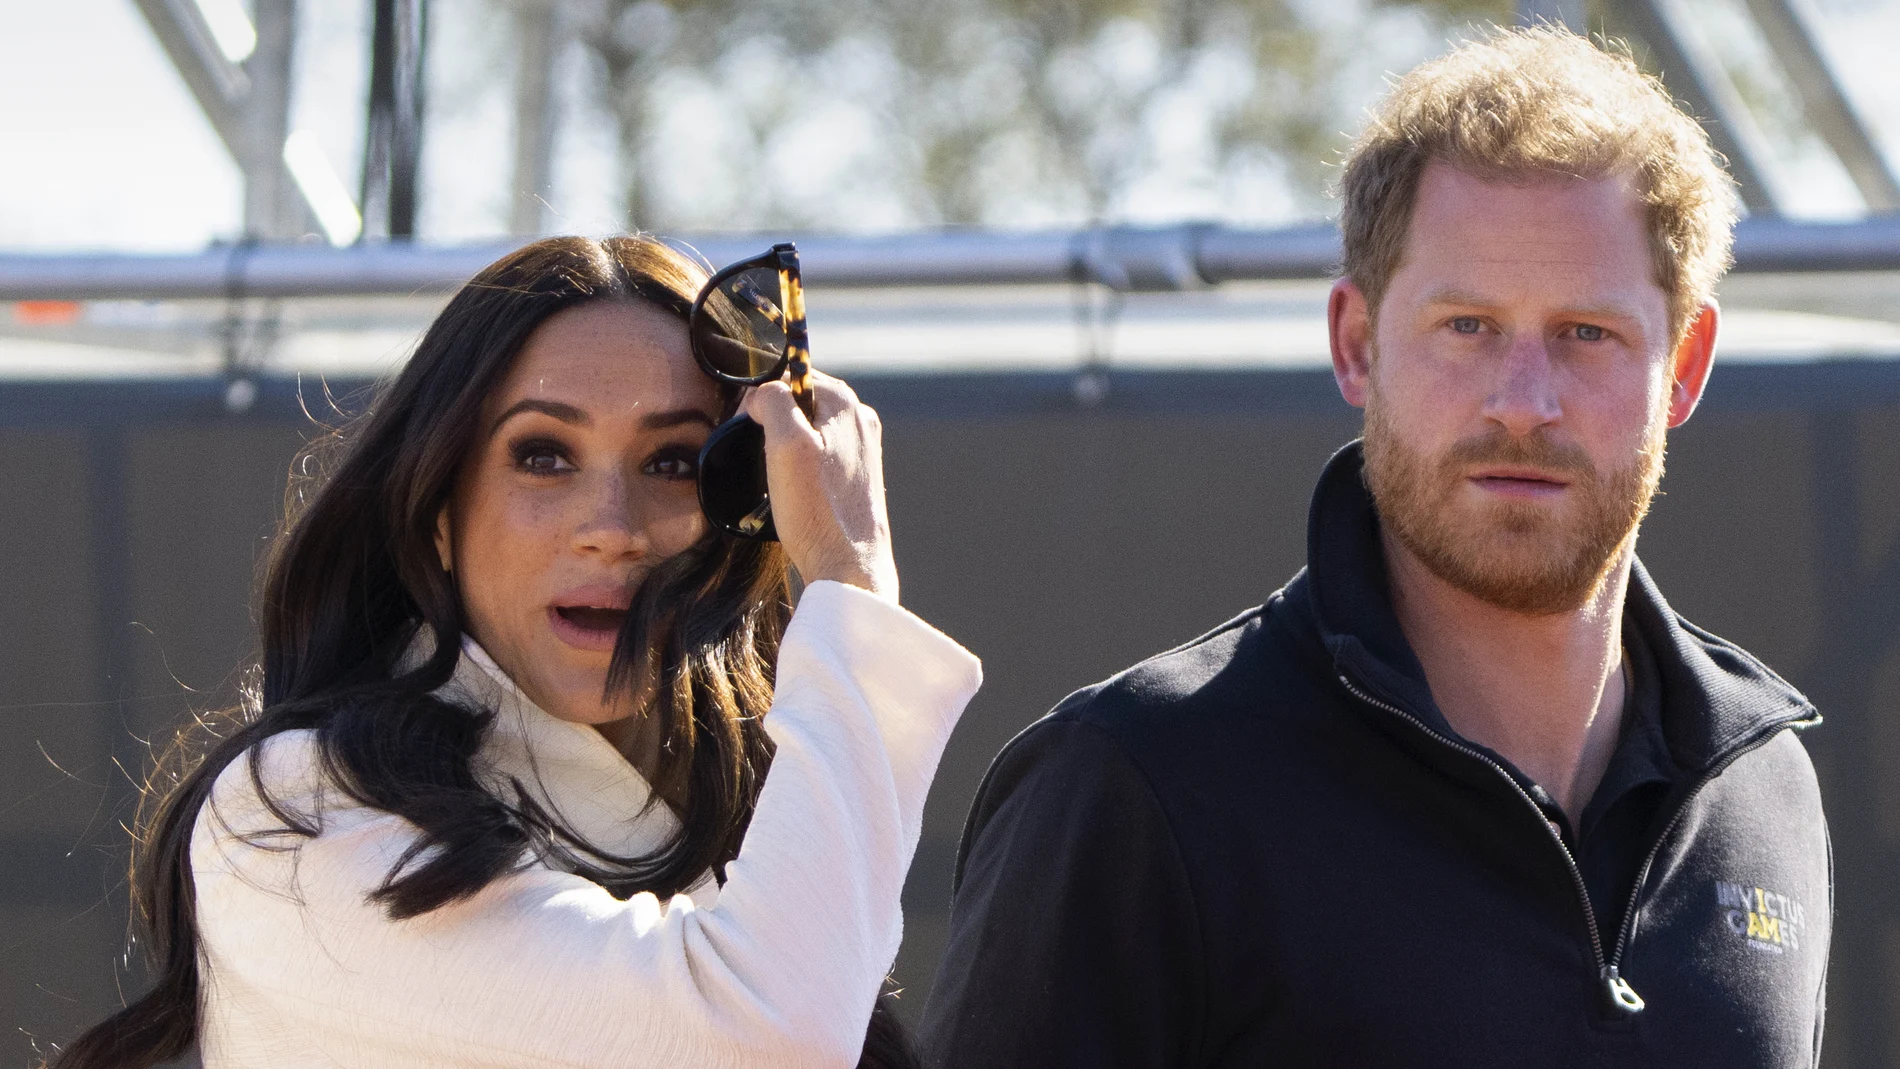  Prince Harry and Meghan Markle, Duke and Duchess of Sussex visit the track and field event at the Invictus Games in The Hague, Netherlands.